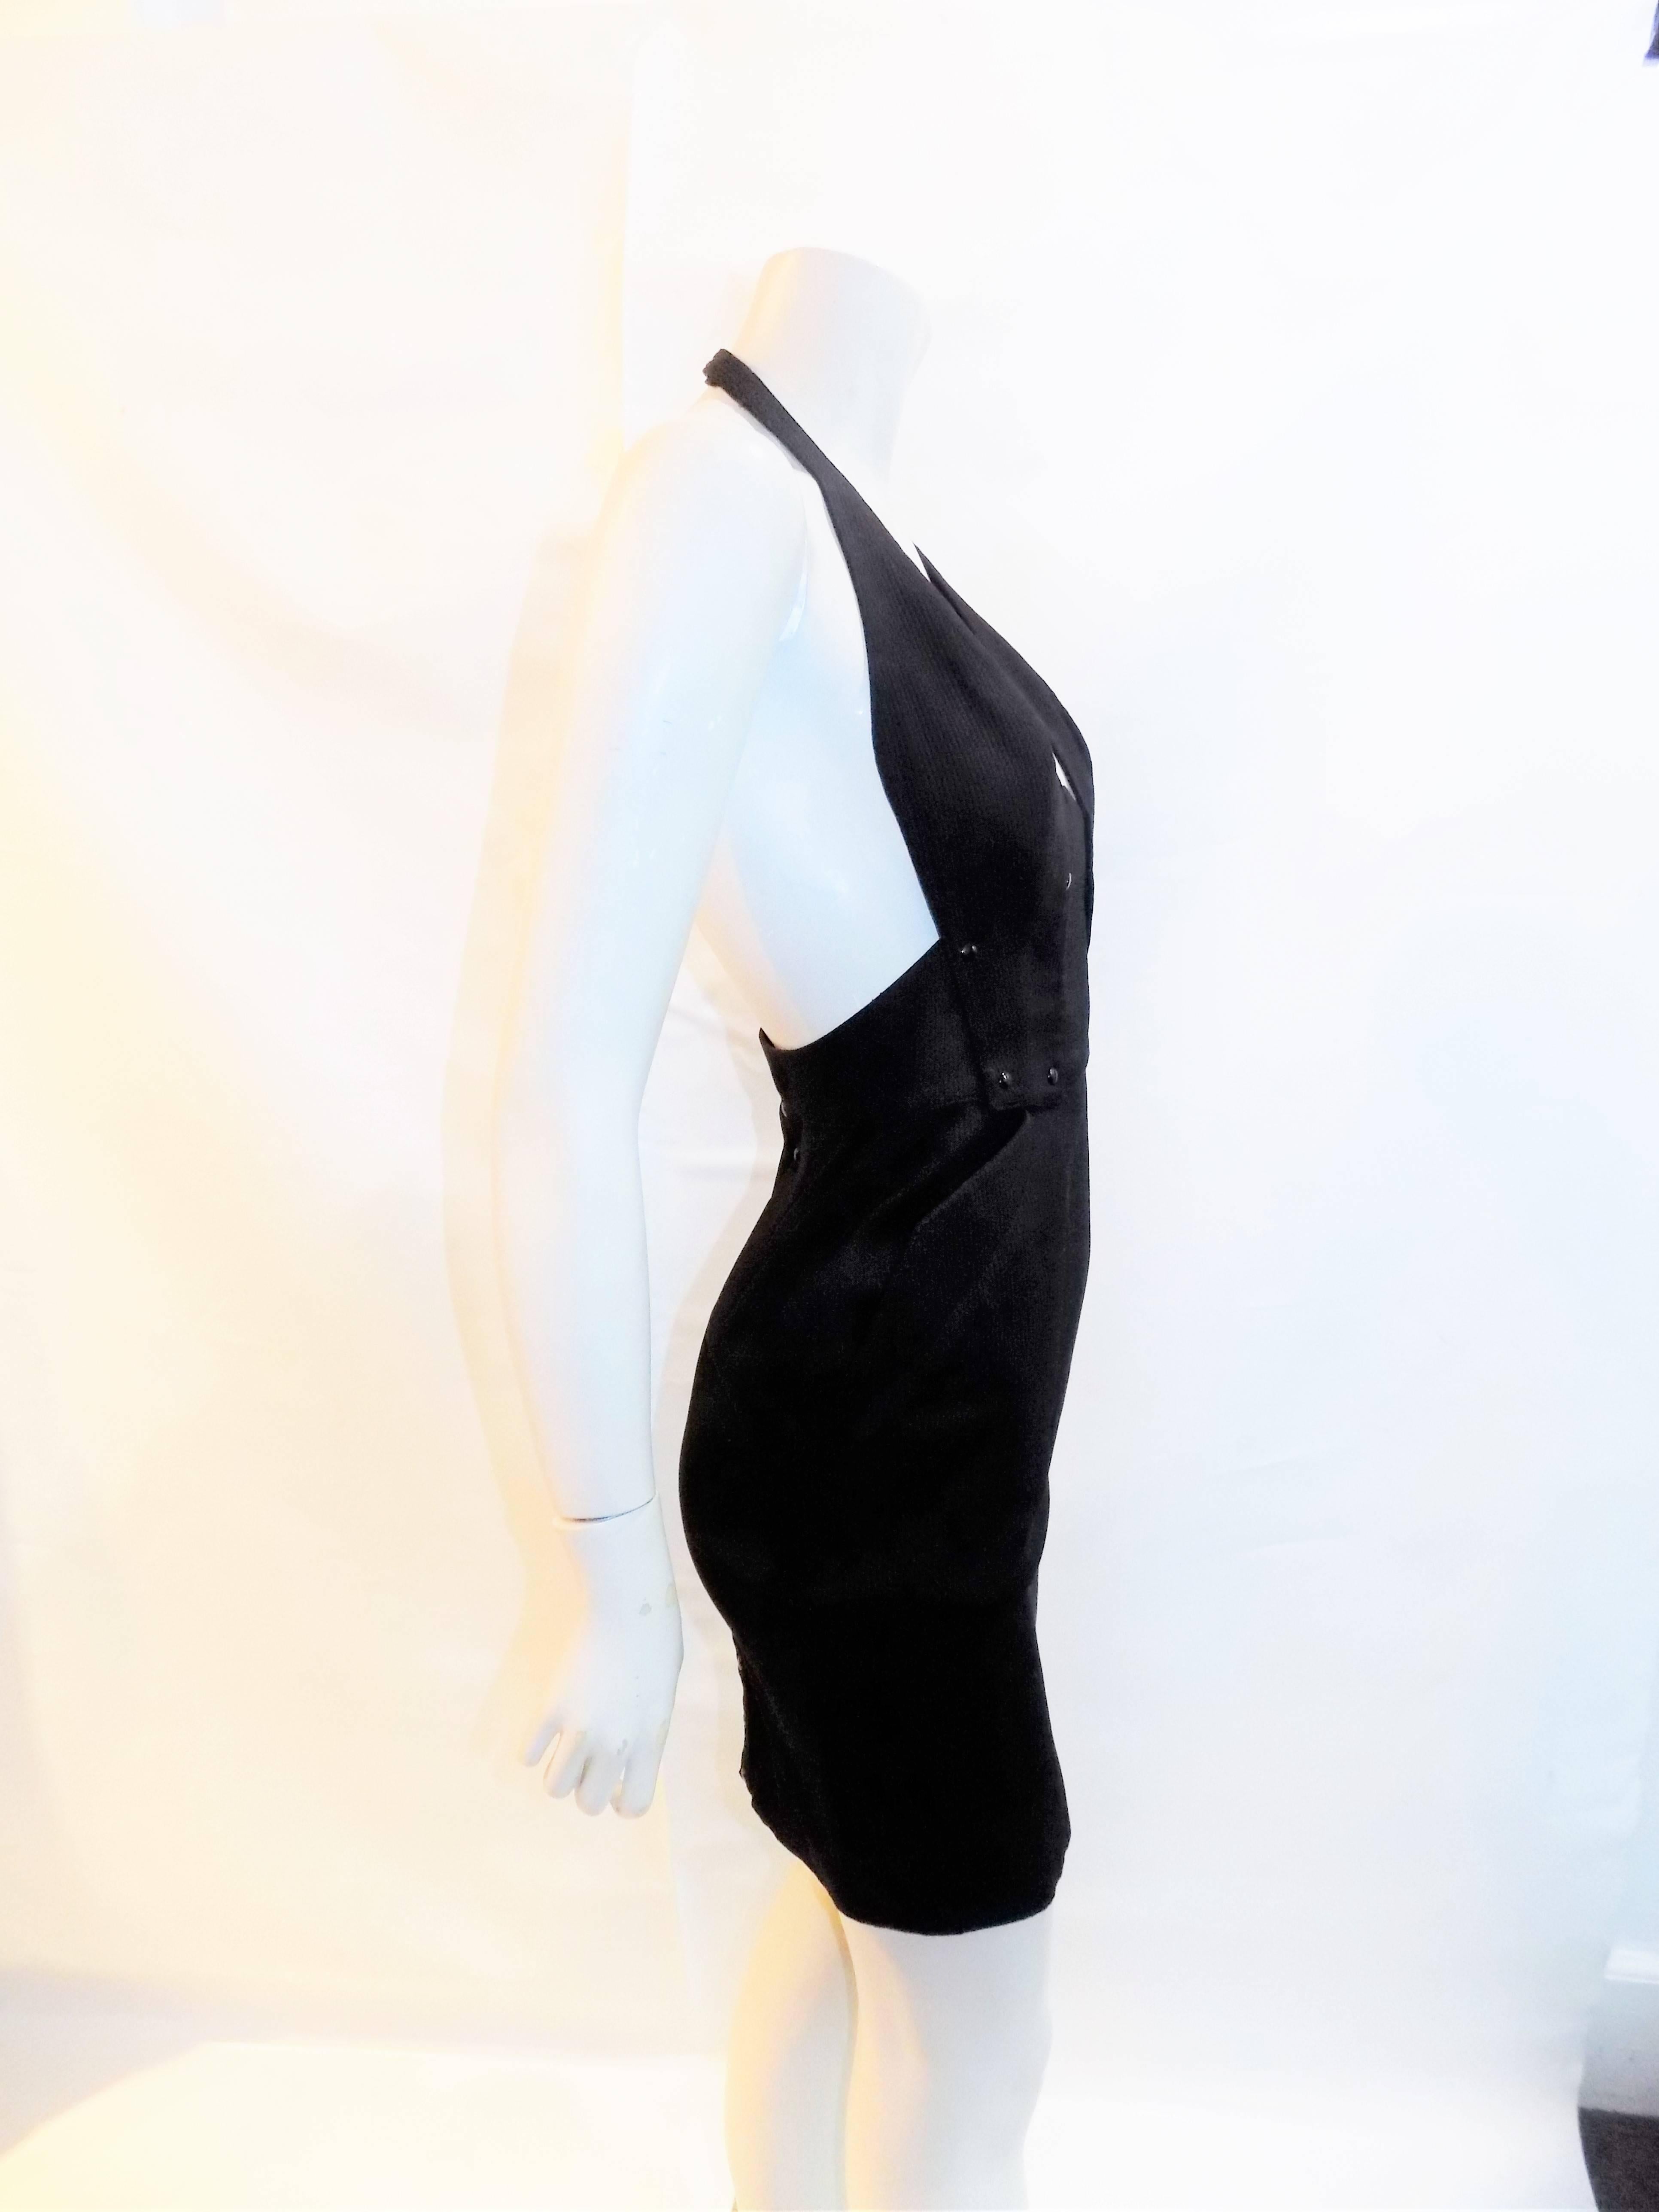 Vintage Mugler halter dress. Cotton fully lined with signature snaps. Side pockets. Incredible fit! Size 34 US 2. Pristine condition!!!